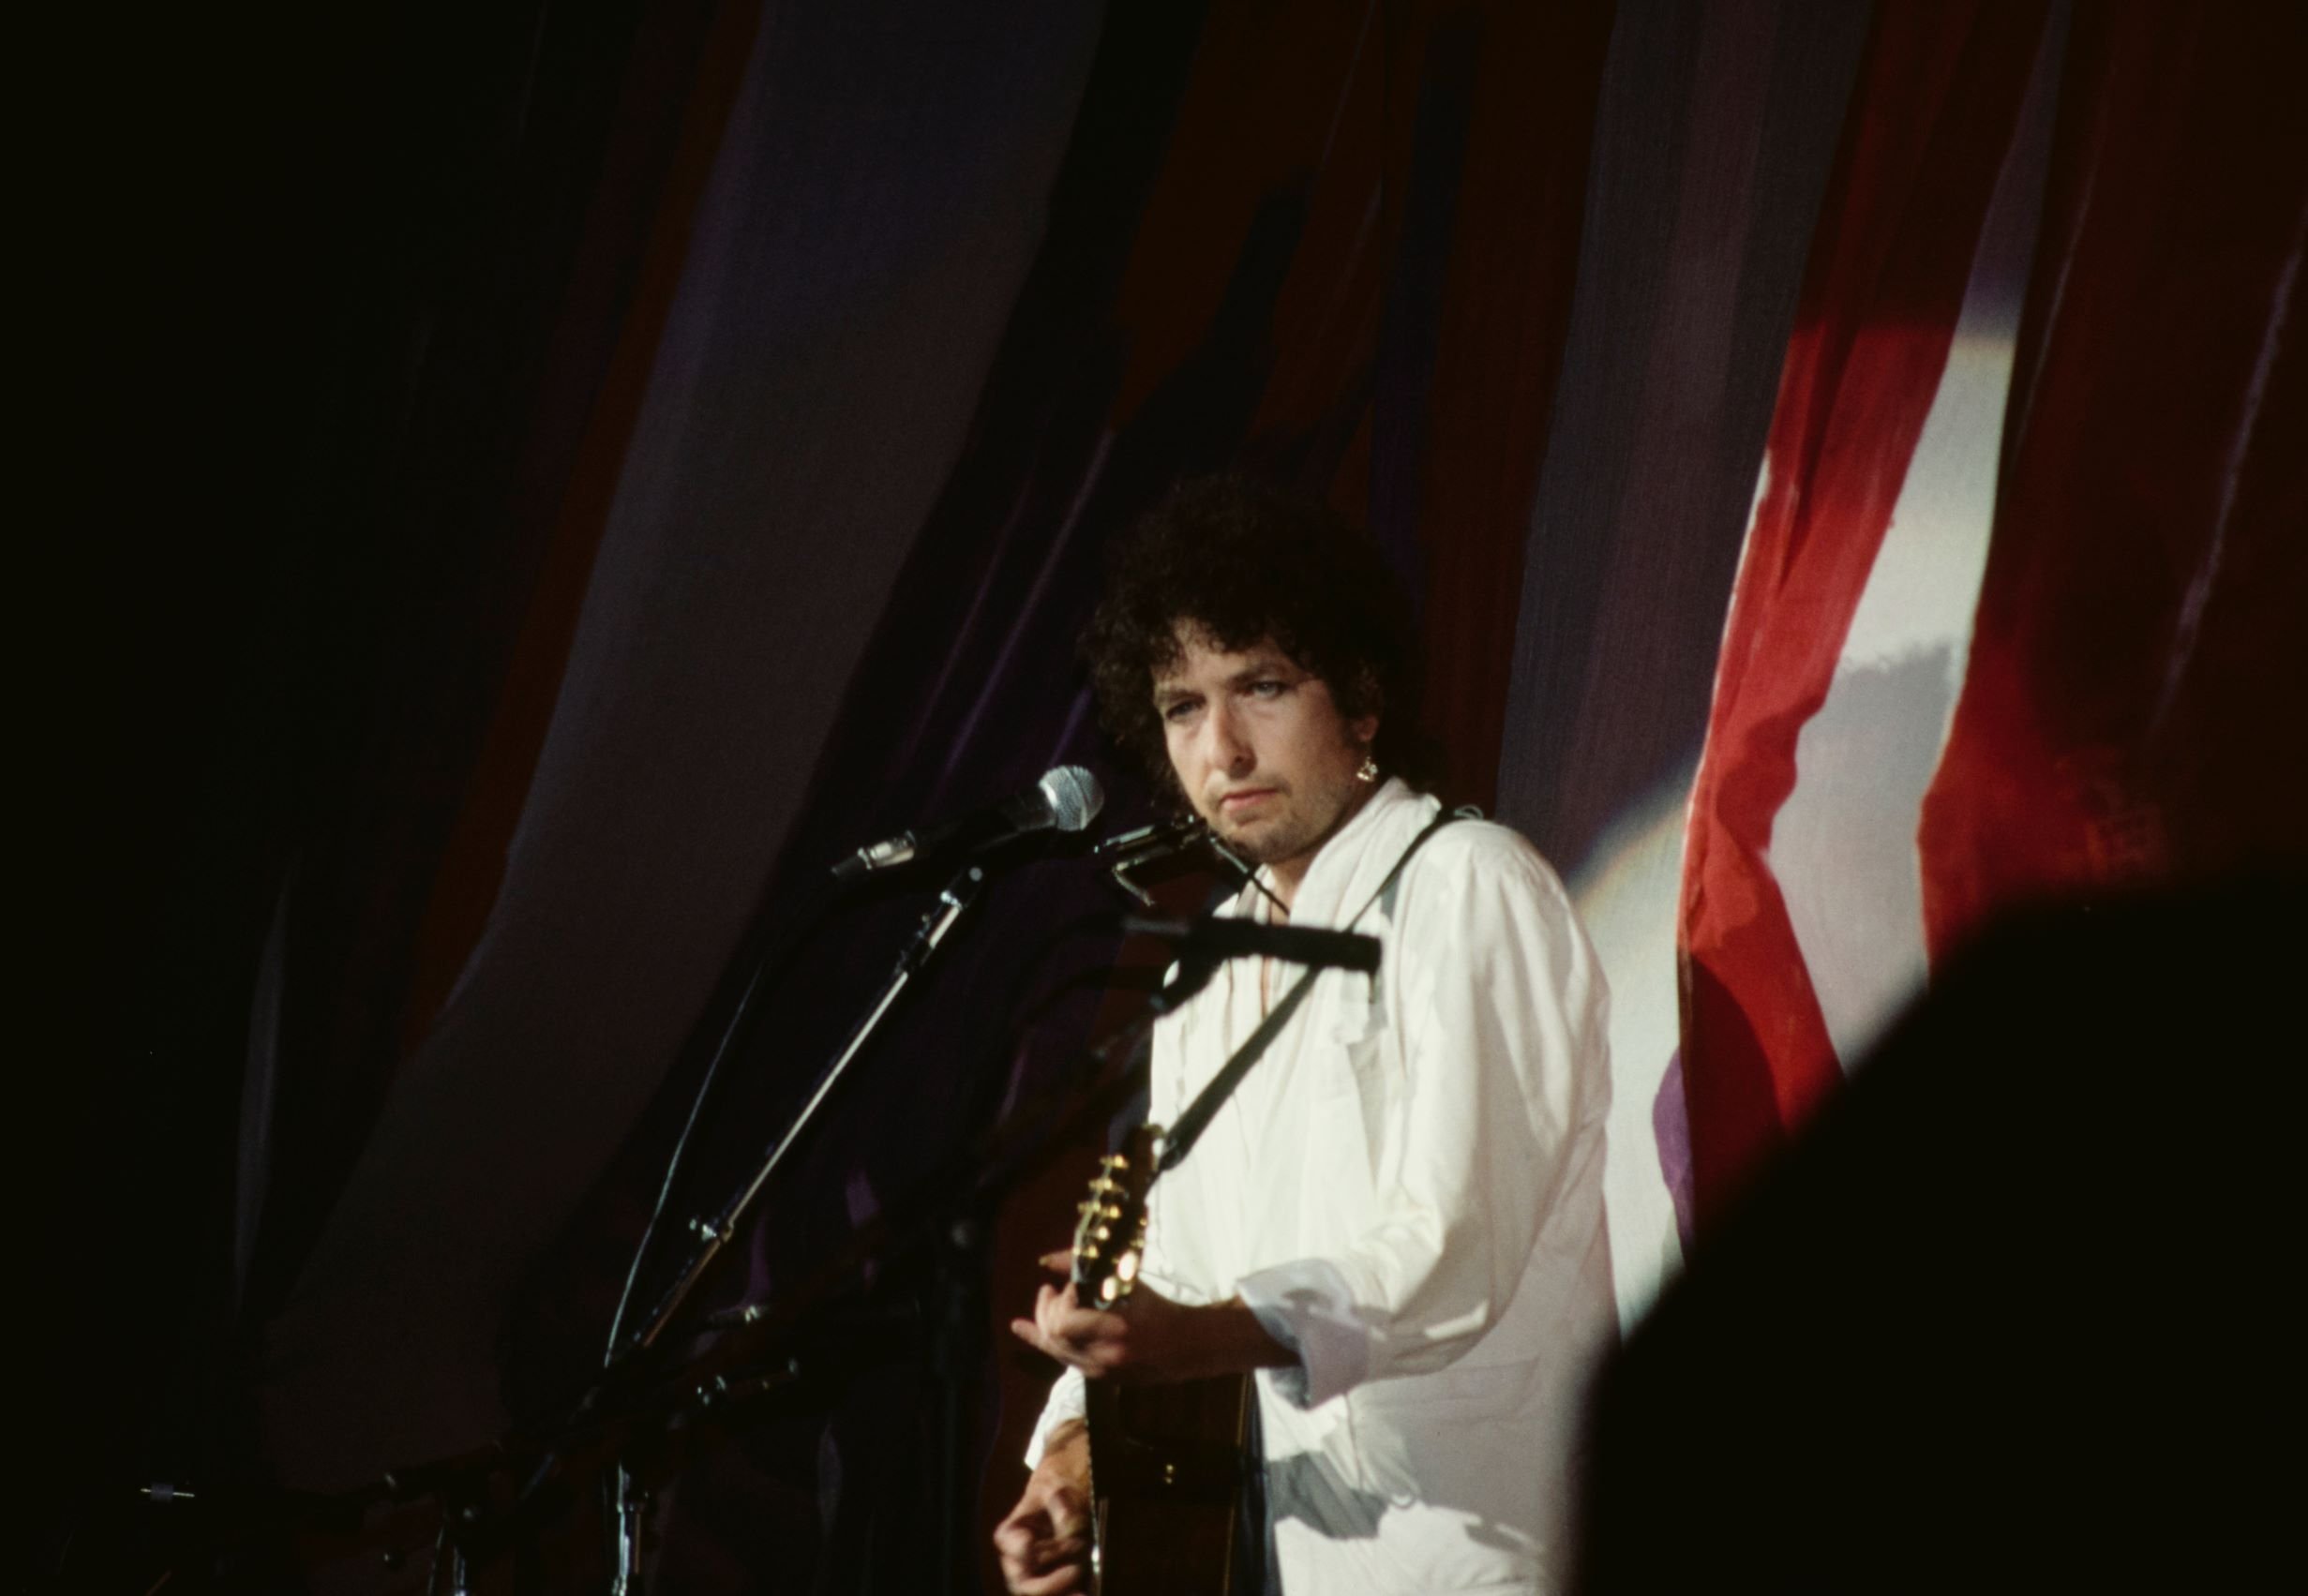 Bob Dylan wears a white suit and holds a guitar onstage at Live Aid.